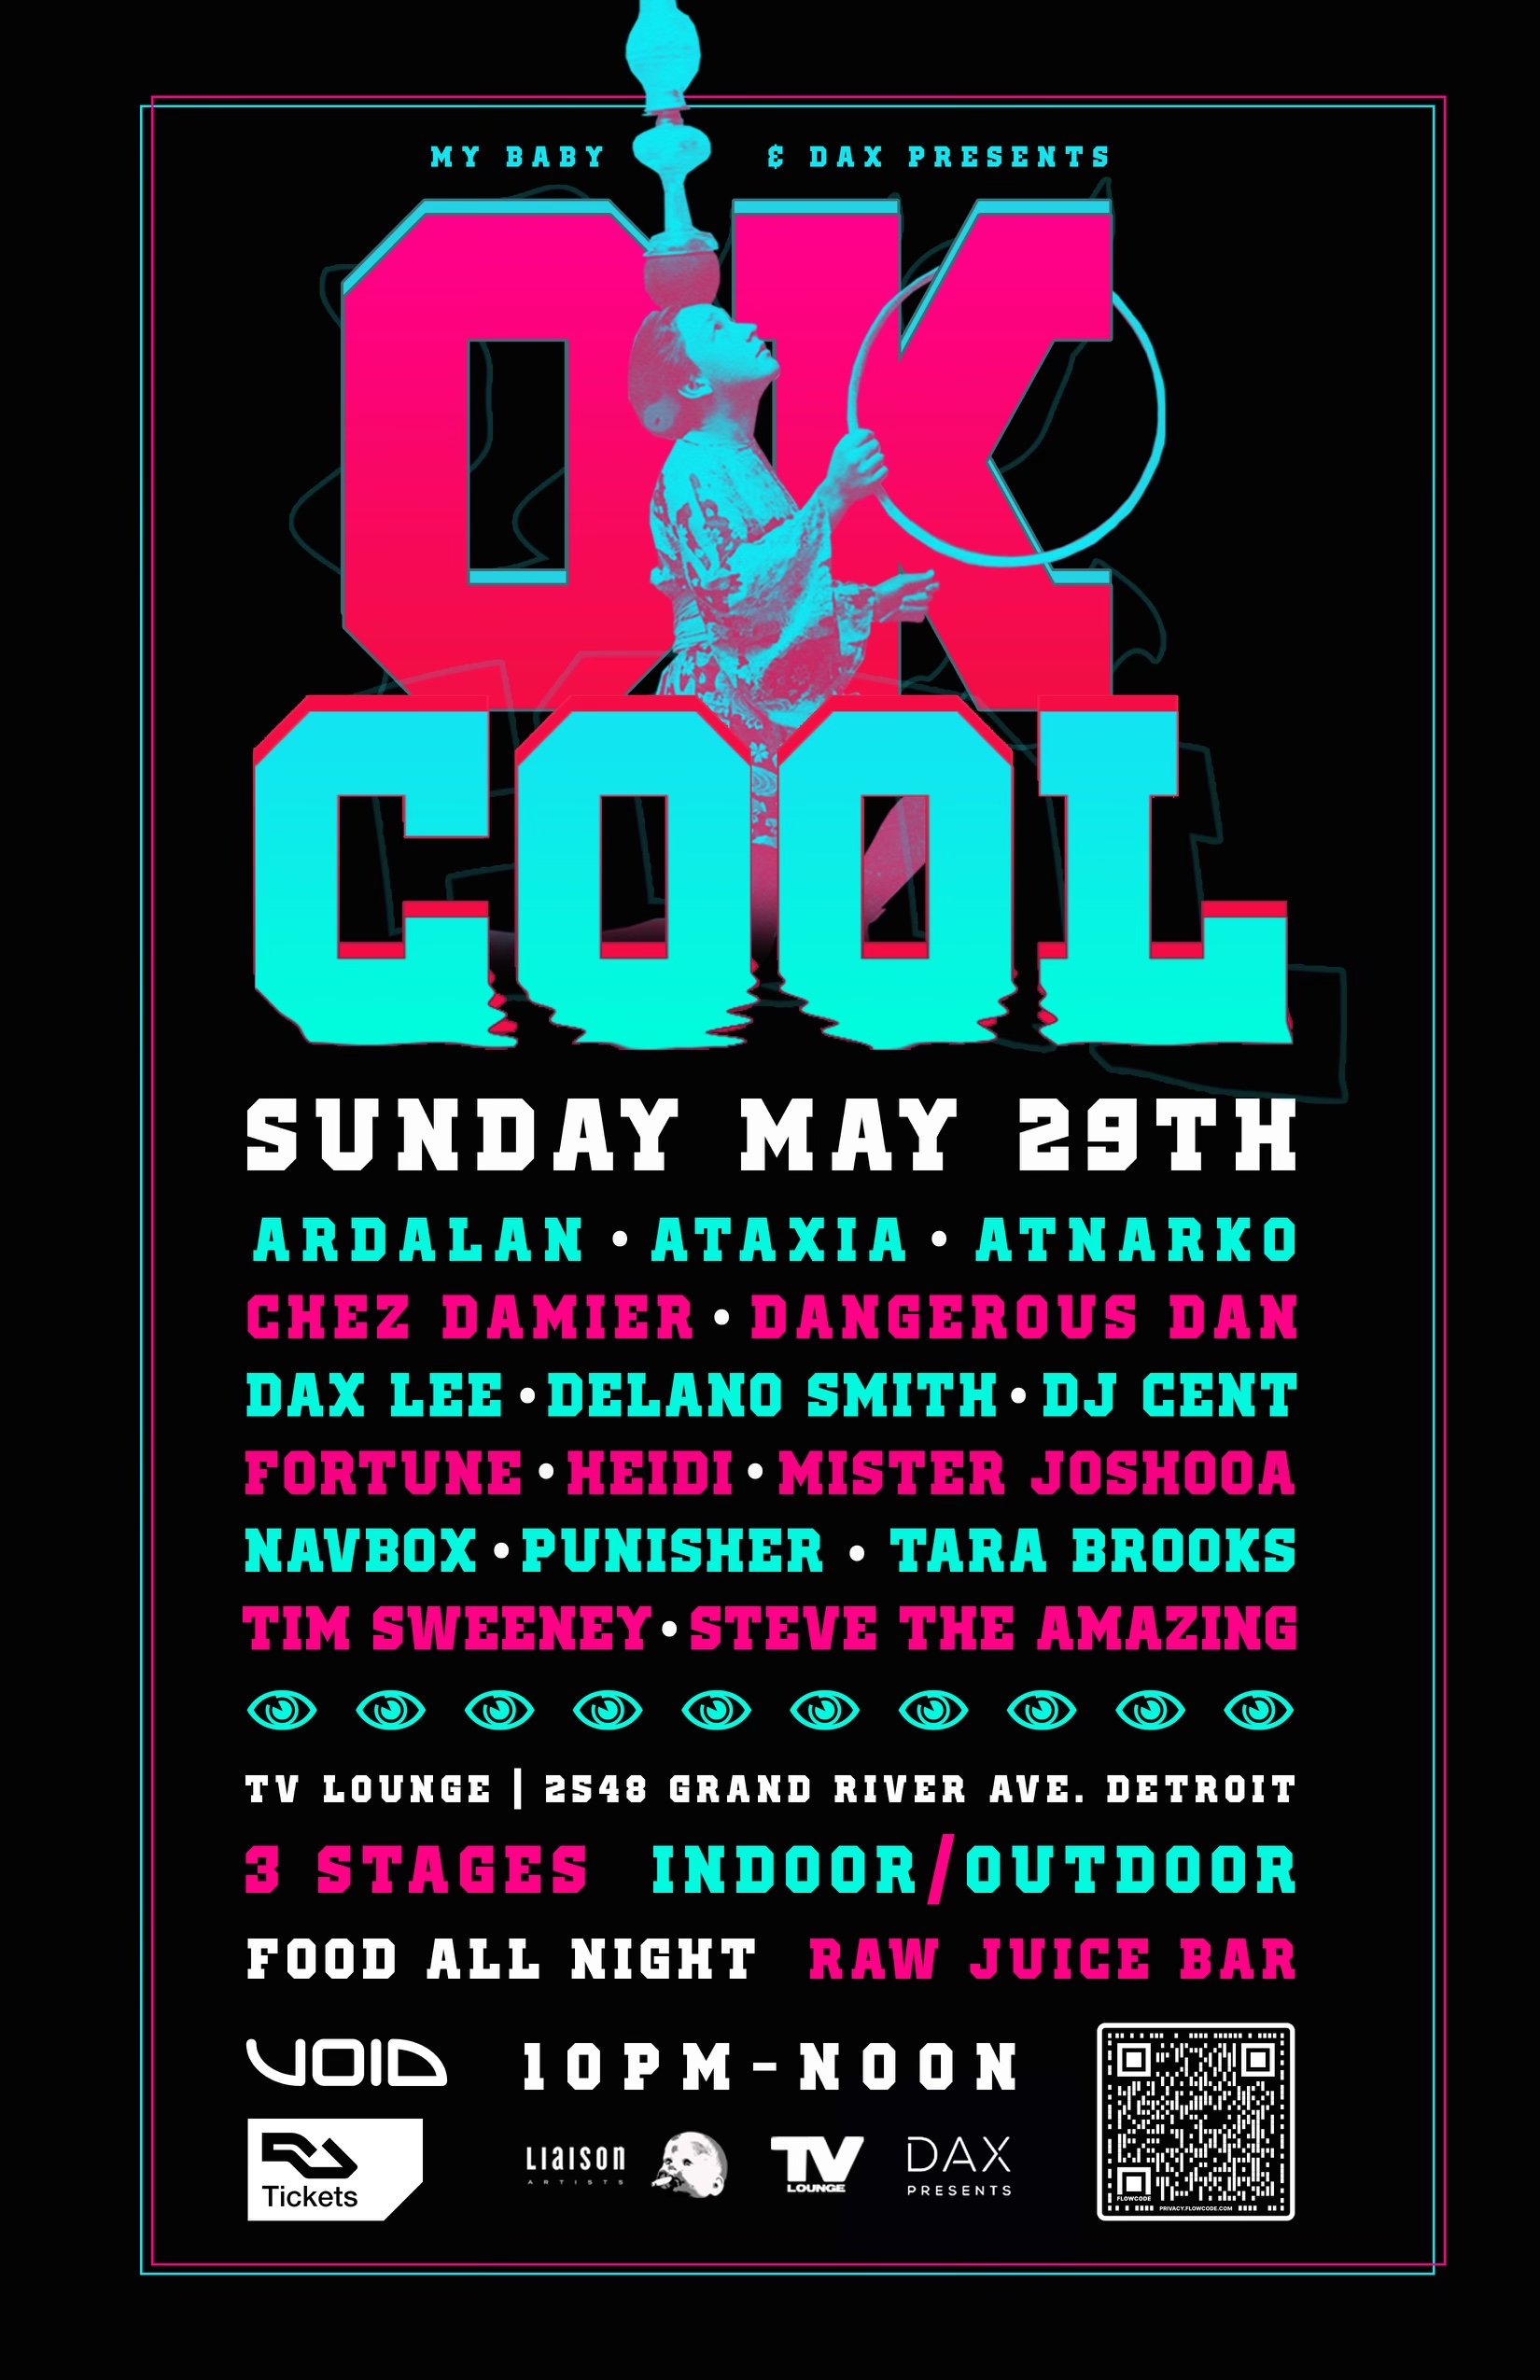 OK Cool - Tickets Available At The Door at TV Lounge, Detroit